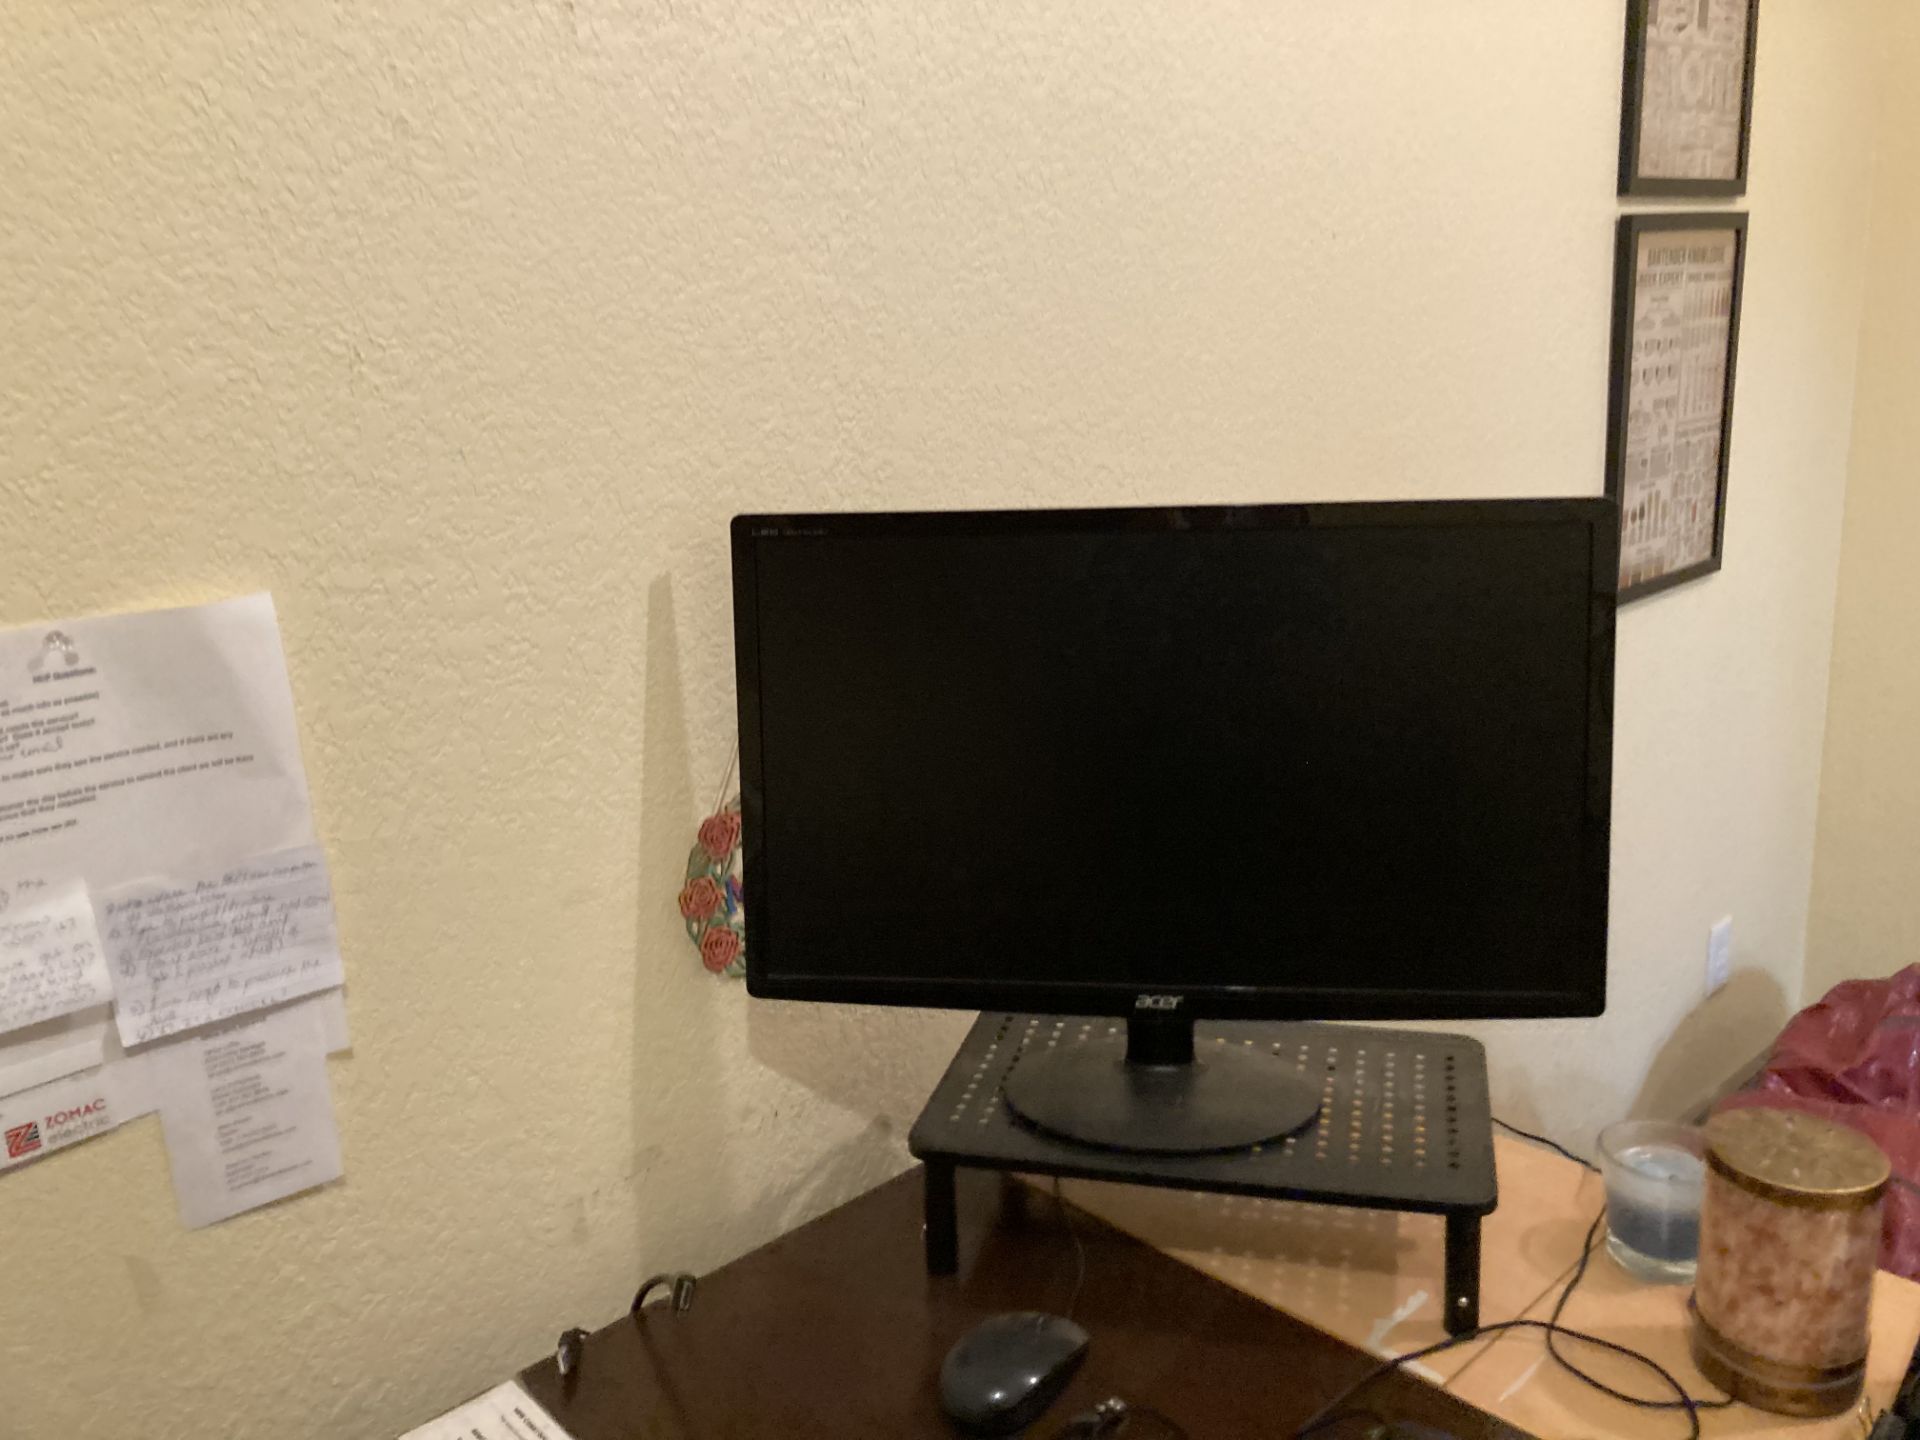 LOT OF: (1) Wood desk, (1) Acer monitor, and (1) chair, with contents - Image 4 of 4